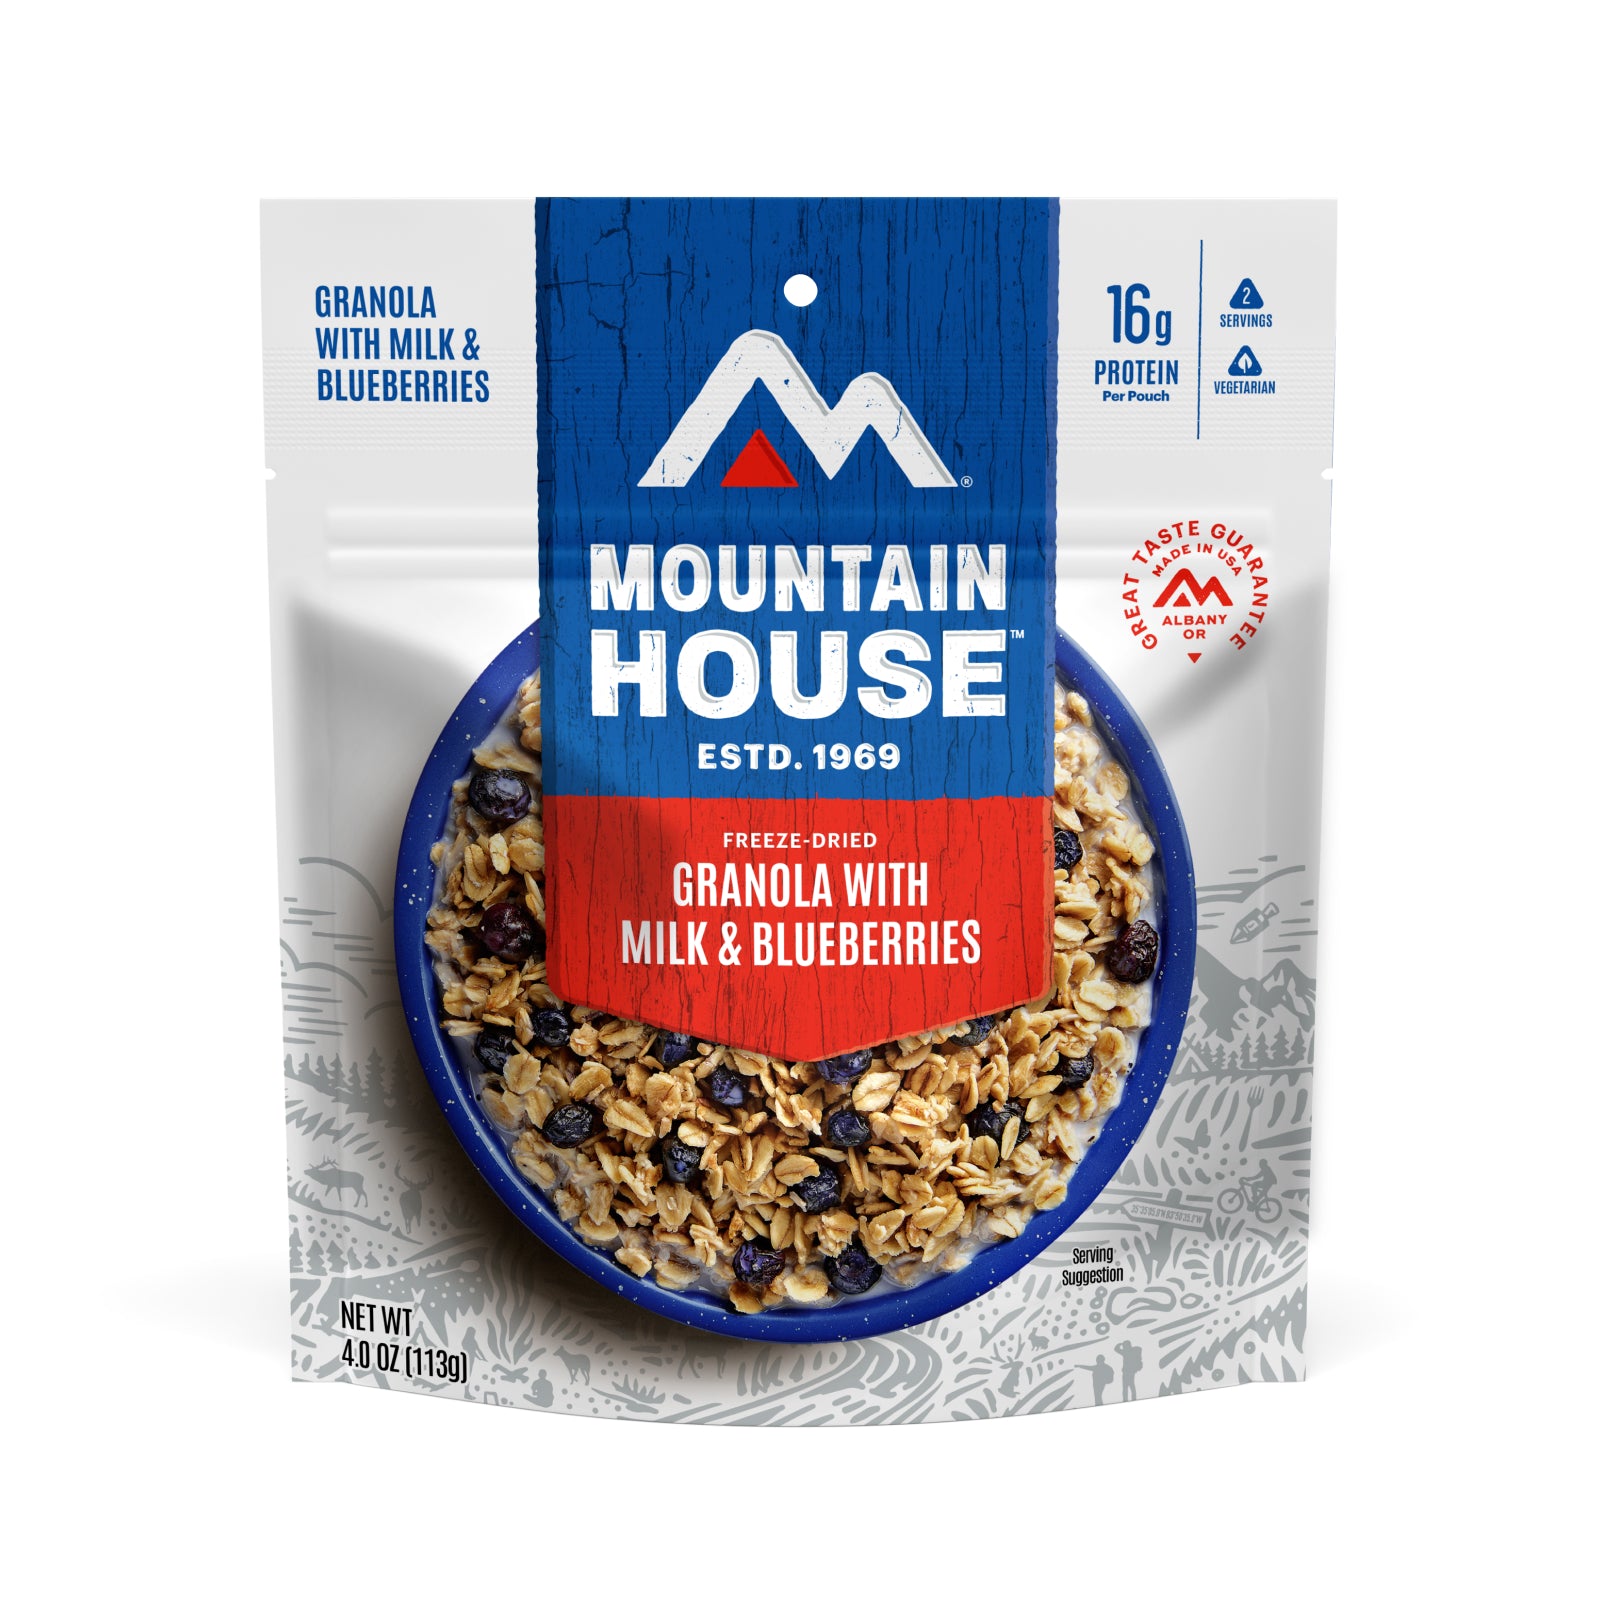 55450 Granola with Milk & Blueberries Adventure Meal Pouch